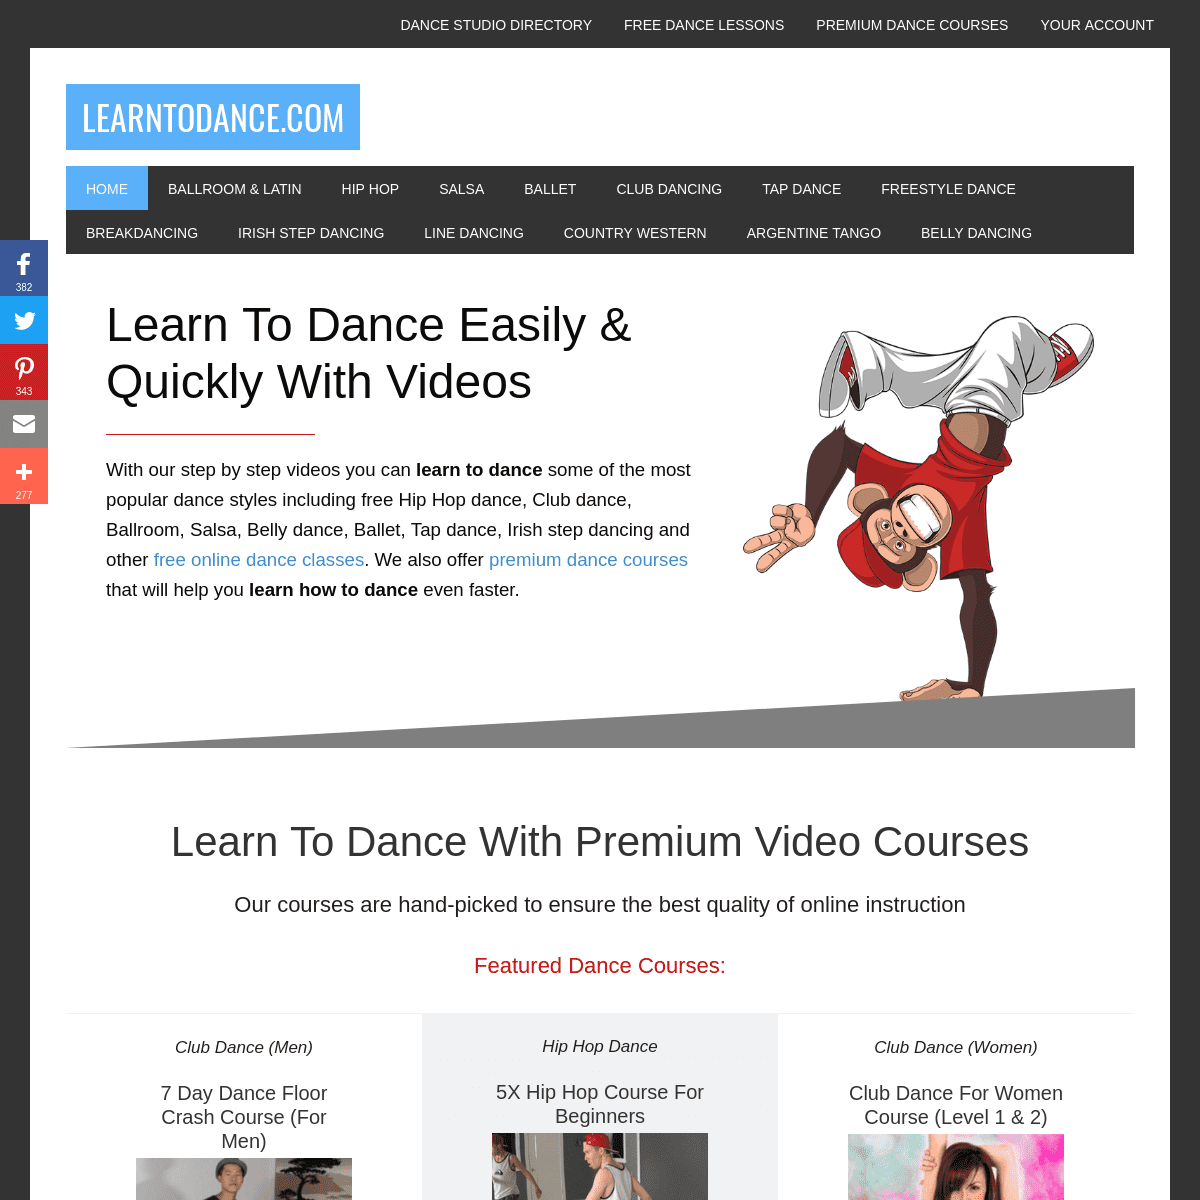 A complete backup of learntodance.com